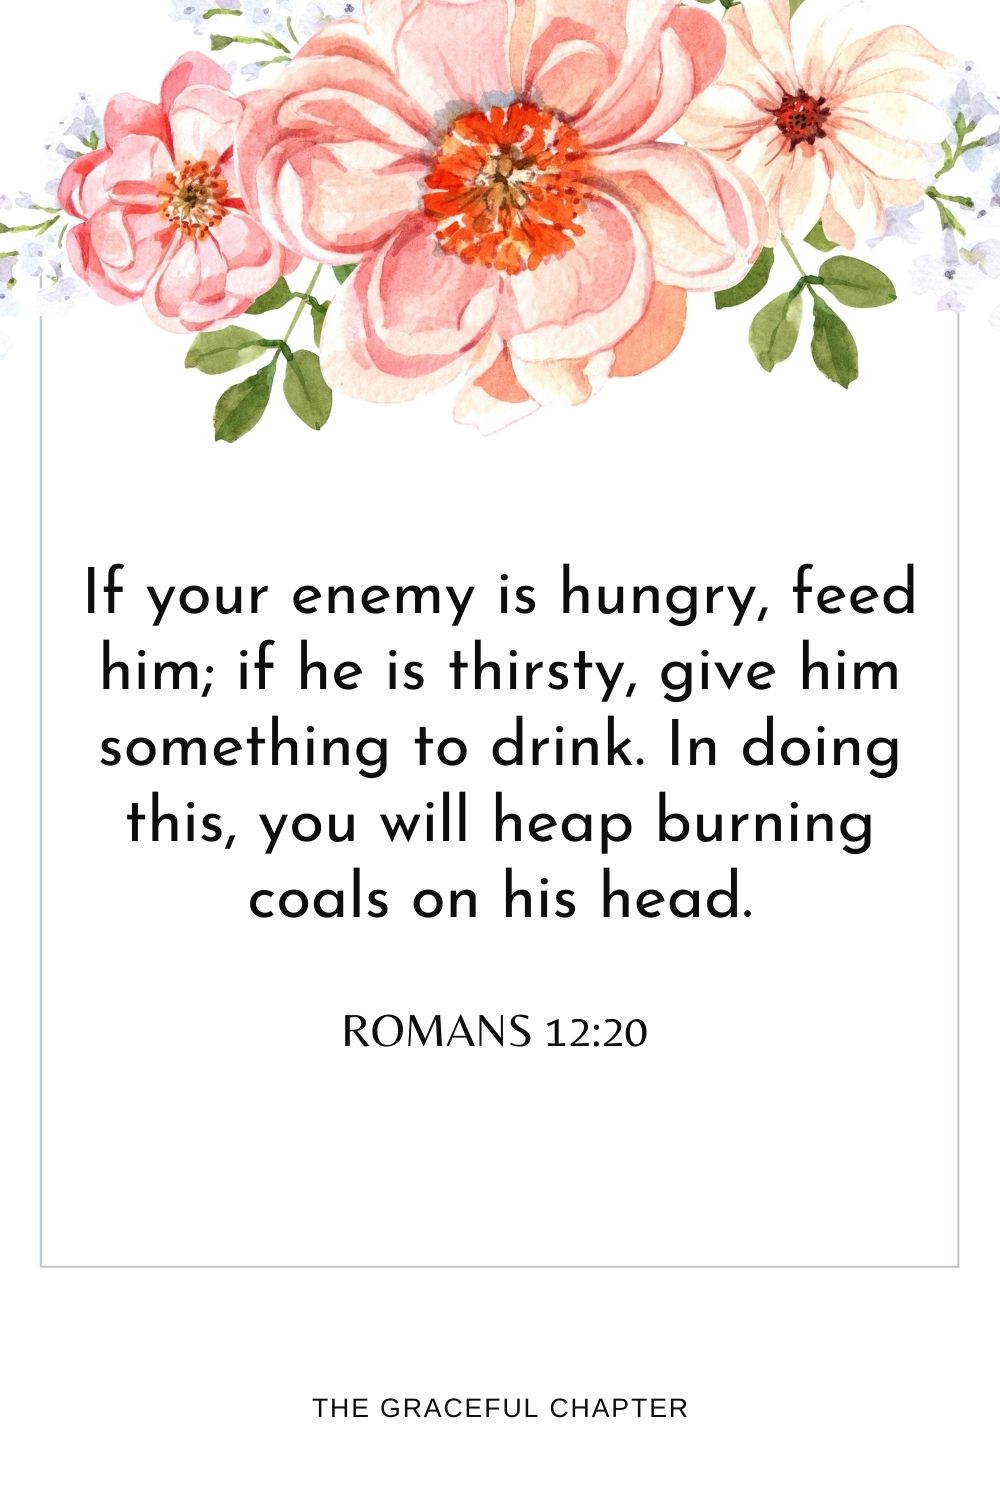 If your enemy is hungry, feed him; if he is thirsty, give him something to drink. In doing this, you will heap burning coals on his head. Romans 12:20